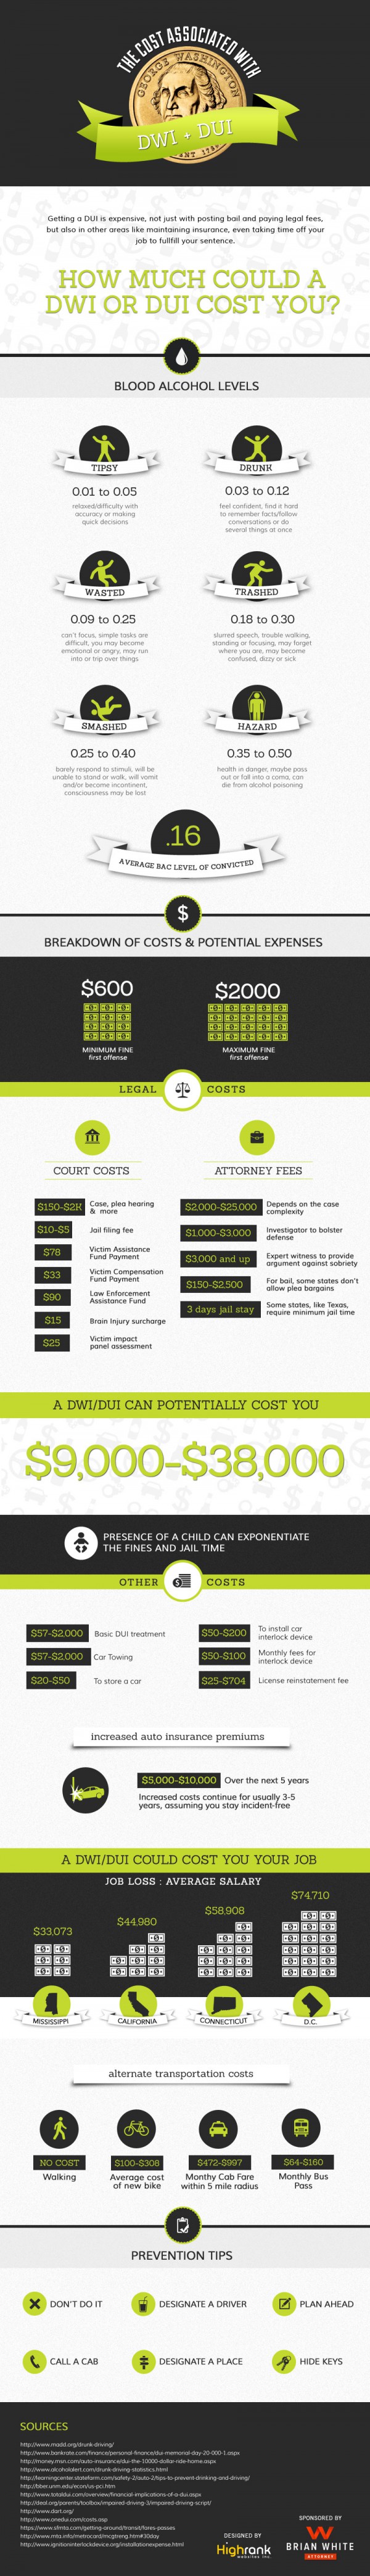 The Costs Associated with a DUI